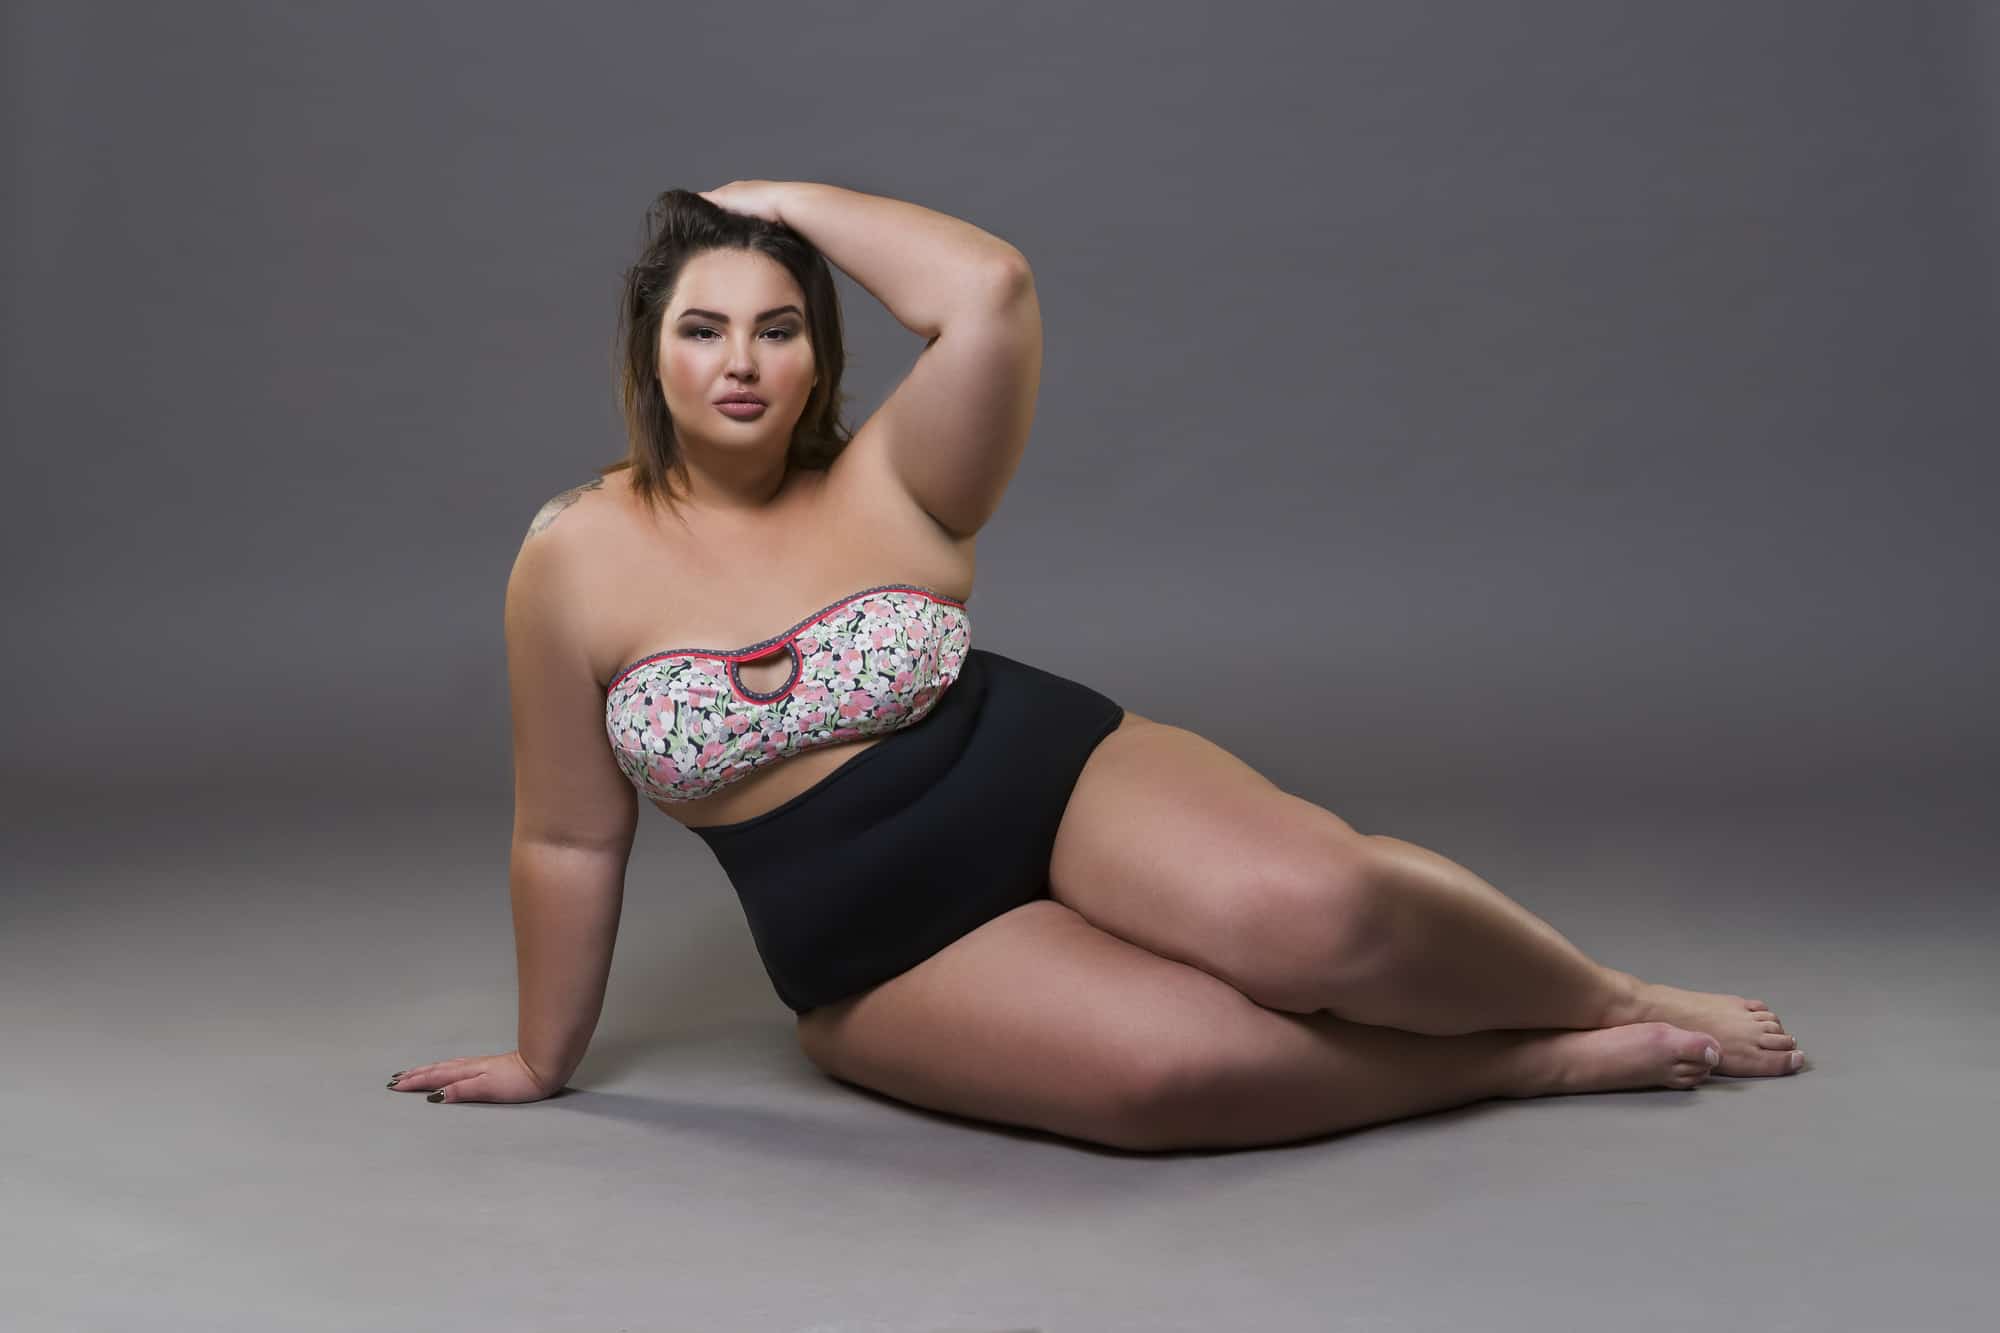 Plus size fashion model in sexy swimsuit, young fat woman on gray studio background, overweight female body, fu